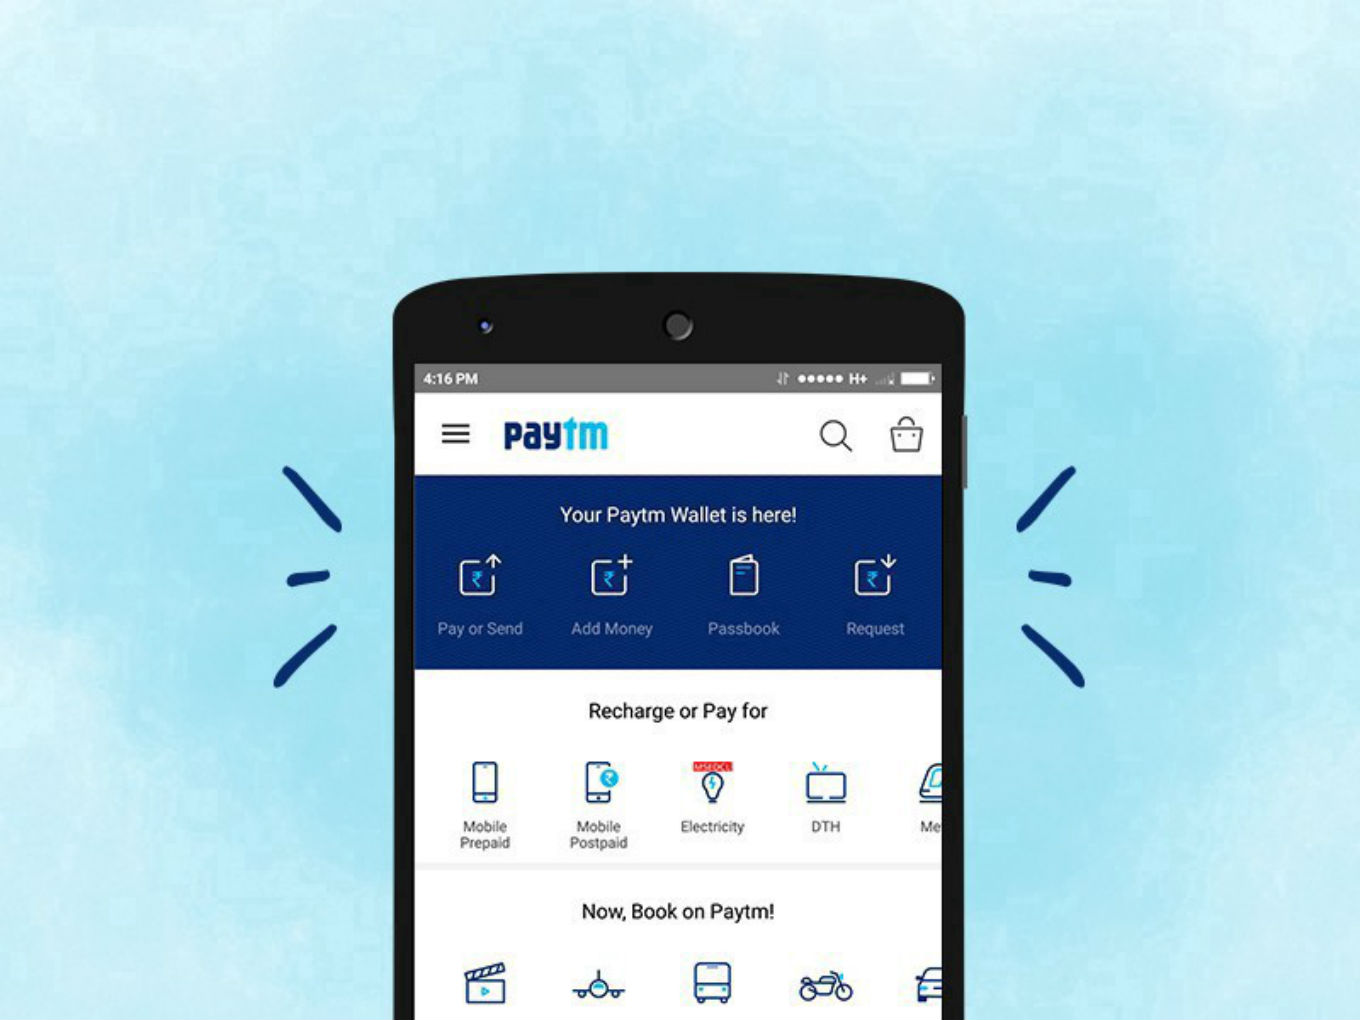 MeitY Counts On Paytm To Power Next Wave Of Digital Payments Growth